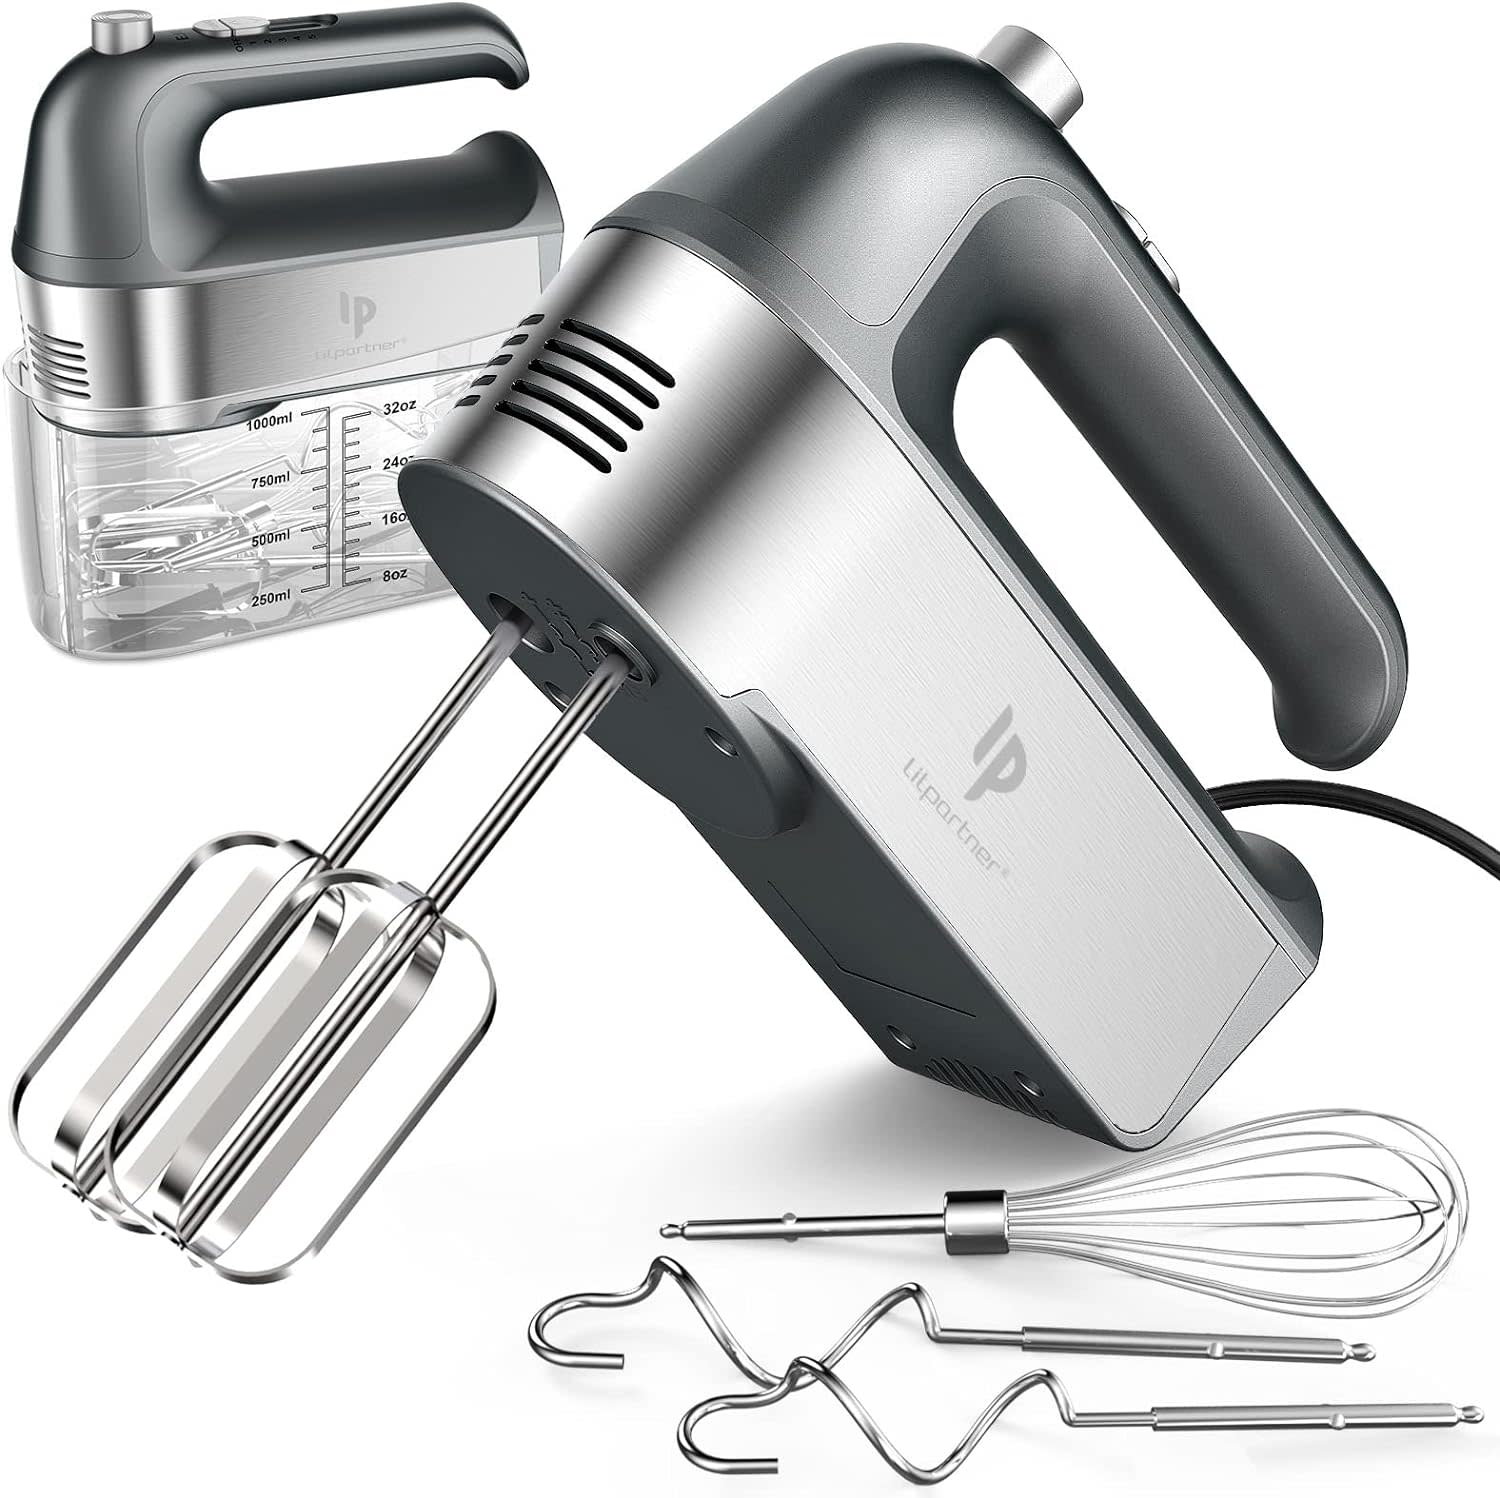 https://cdn.apartmenttherapy.info/image/upload/v1696530377/gen-workflow/product-database/lilpartner-electric-hand-mixer.jpg